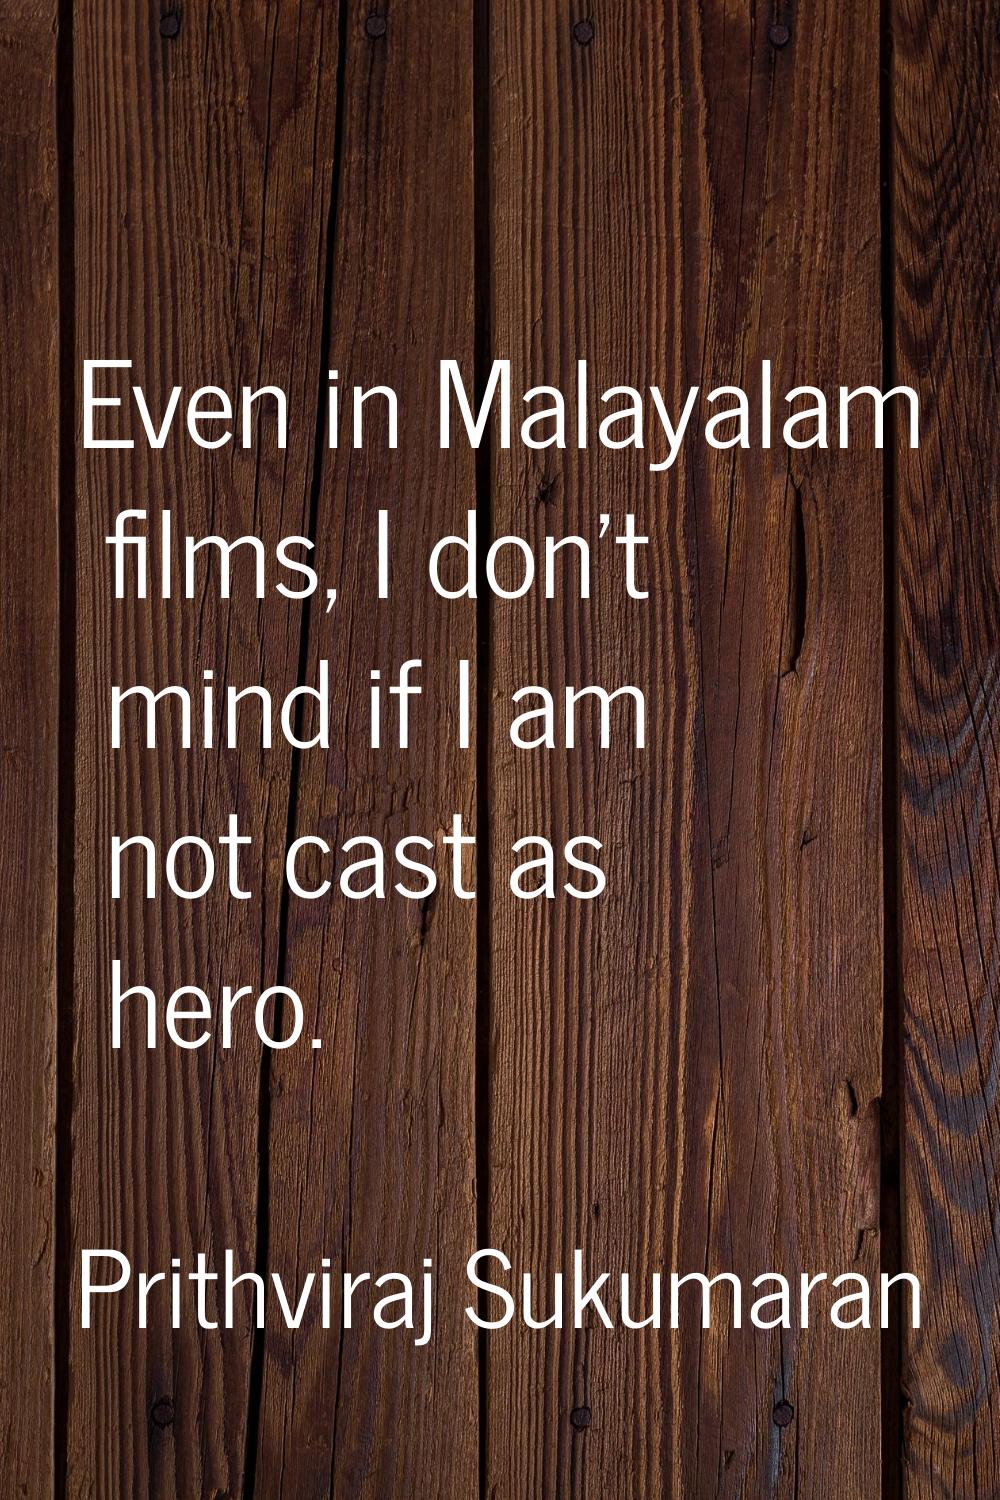 Even in Malayalam films, I don't mind if I am not cast as hero.